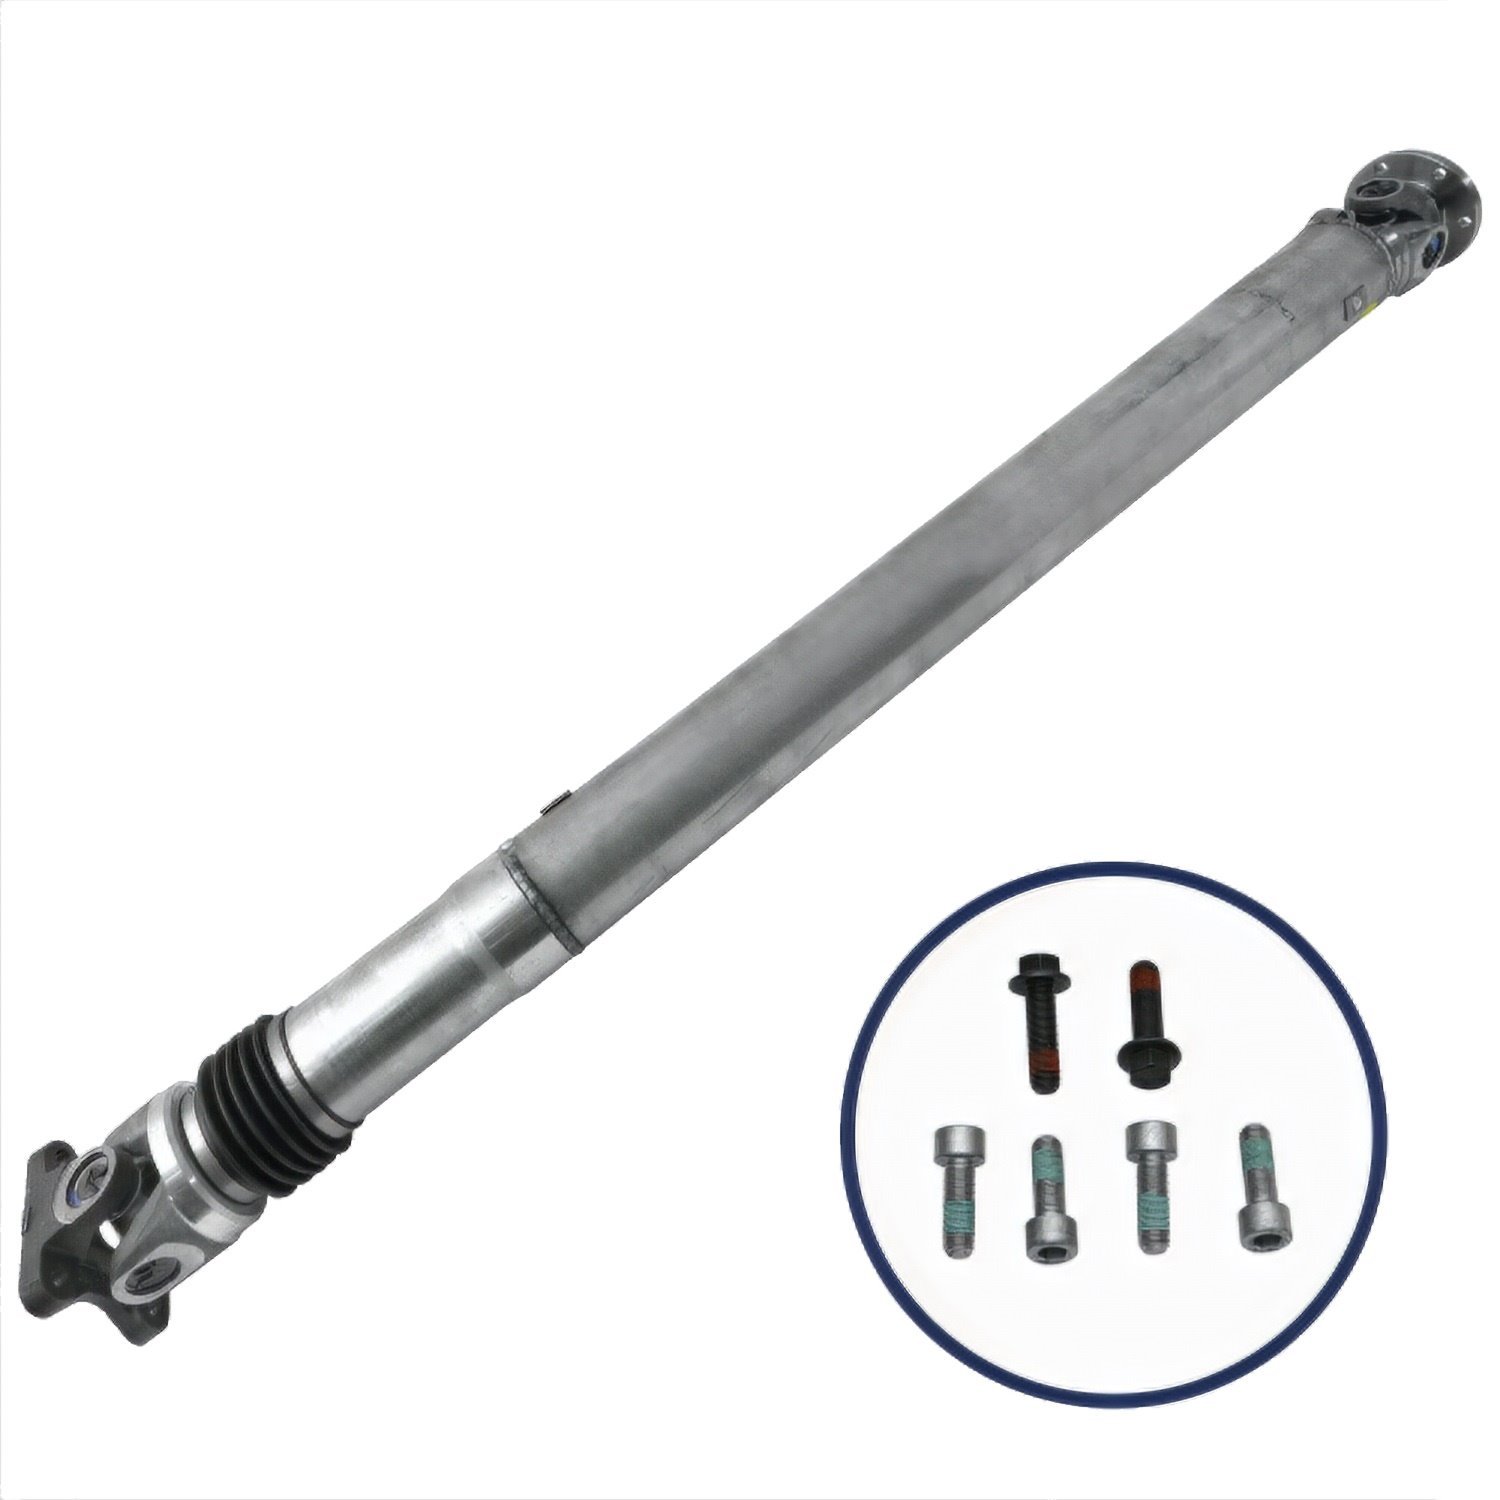 One-Piece Aluminum Driveshaft Assembly 2005-2010 Ford Mustang GT